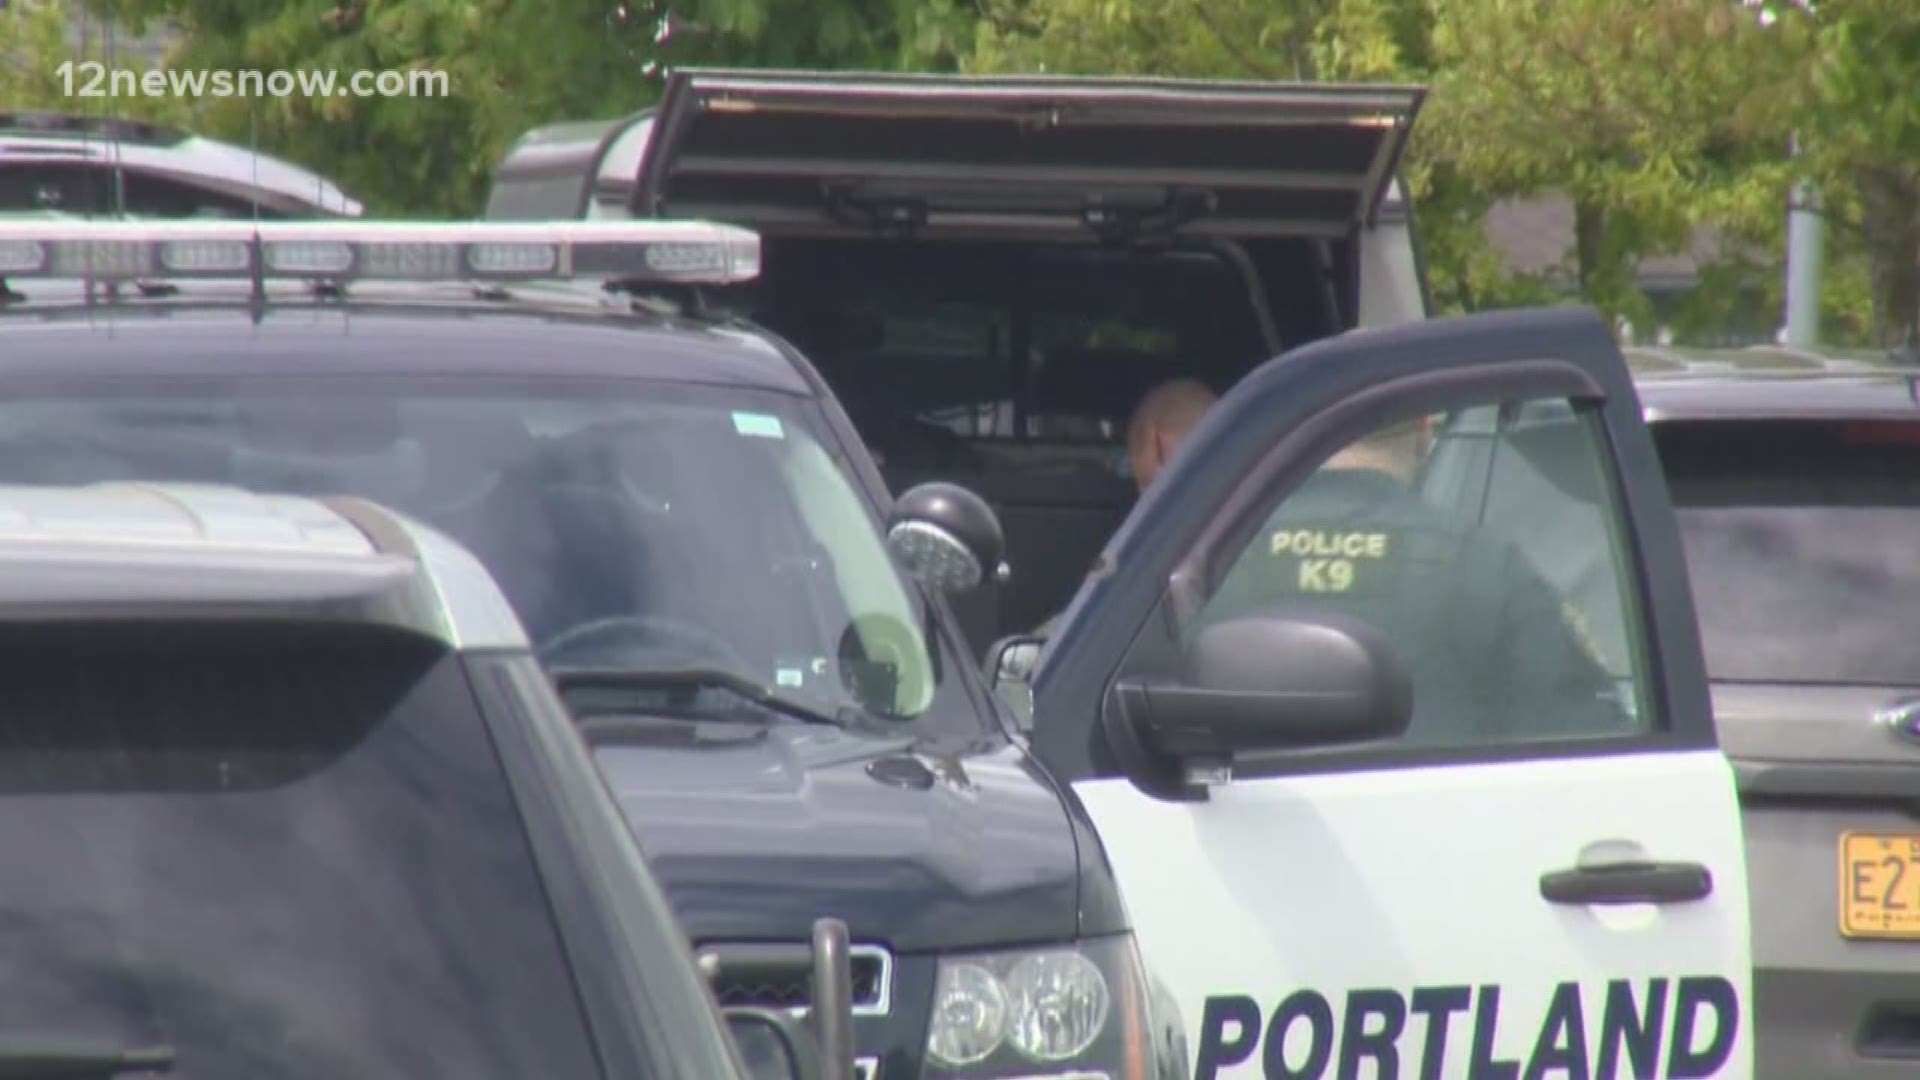 Angel Granados Dias, 18, reportedly entered a classroom Friday at Parkrose High School in Portland with a rifle. Head football coach Keanon Lowe jumped into action and tackled Dias. Dias is facing multiple charges including reckless endangerment and possession of a loaded firearm in a public place. He will make his first appearance in court today.